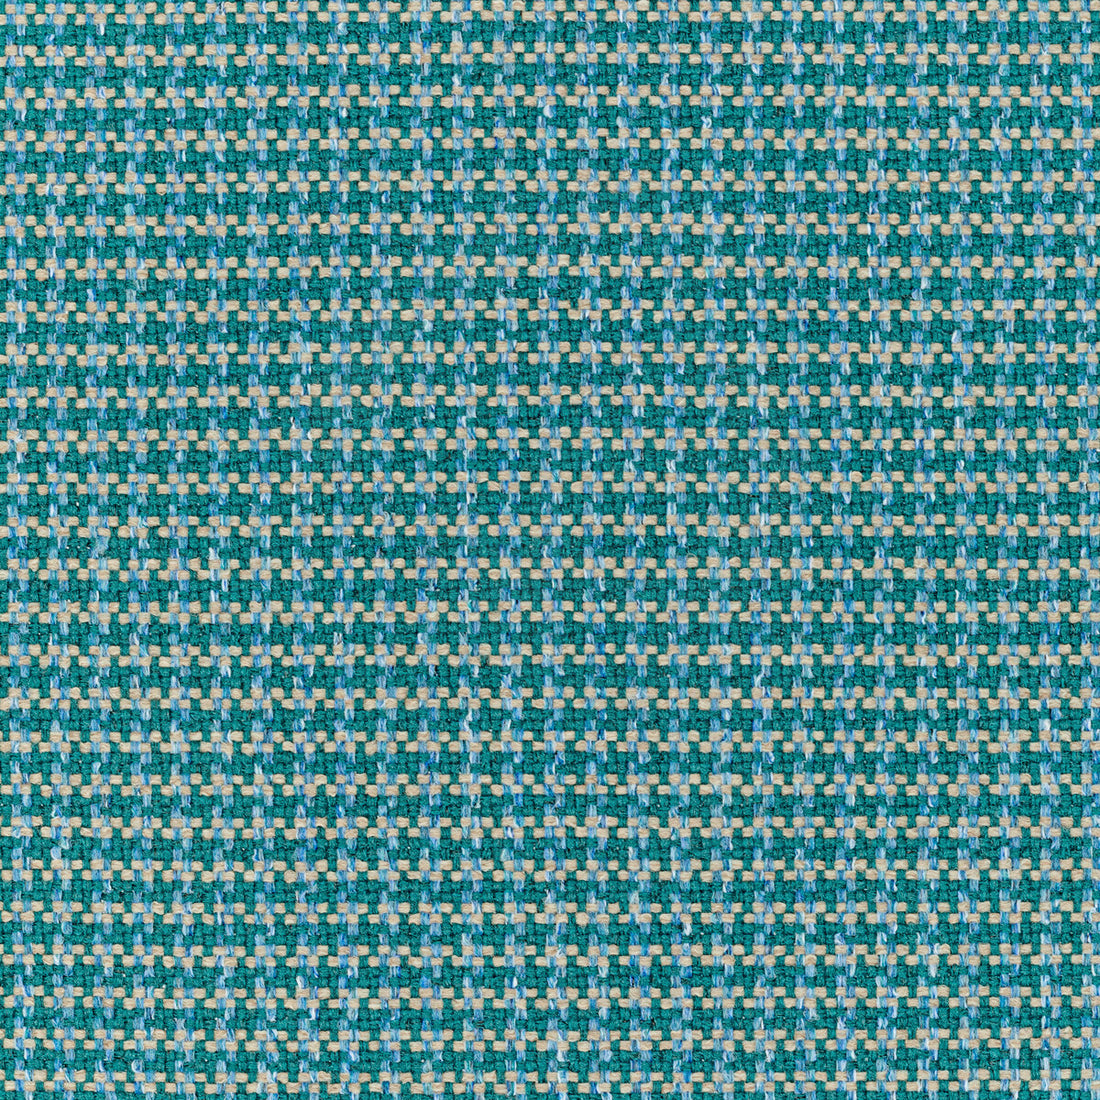 Steamboat fabric in serenade color - pattern 36258.35.0 - by Kravet Contract in the Supreen collection